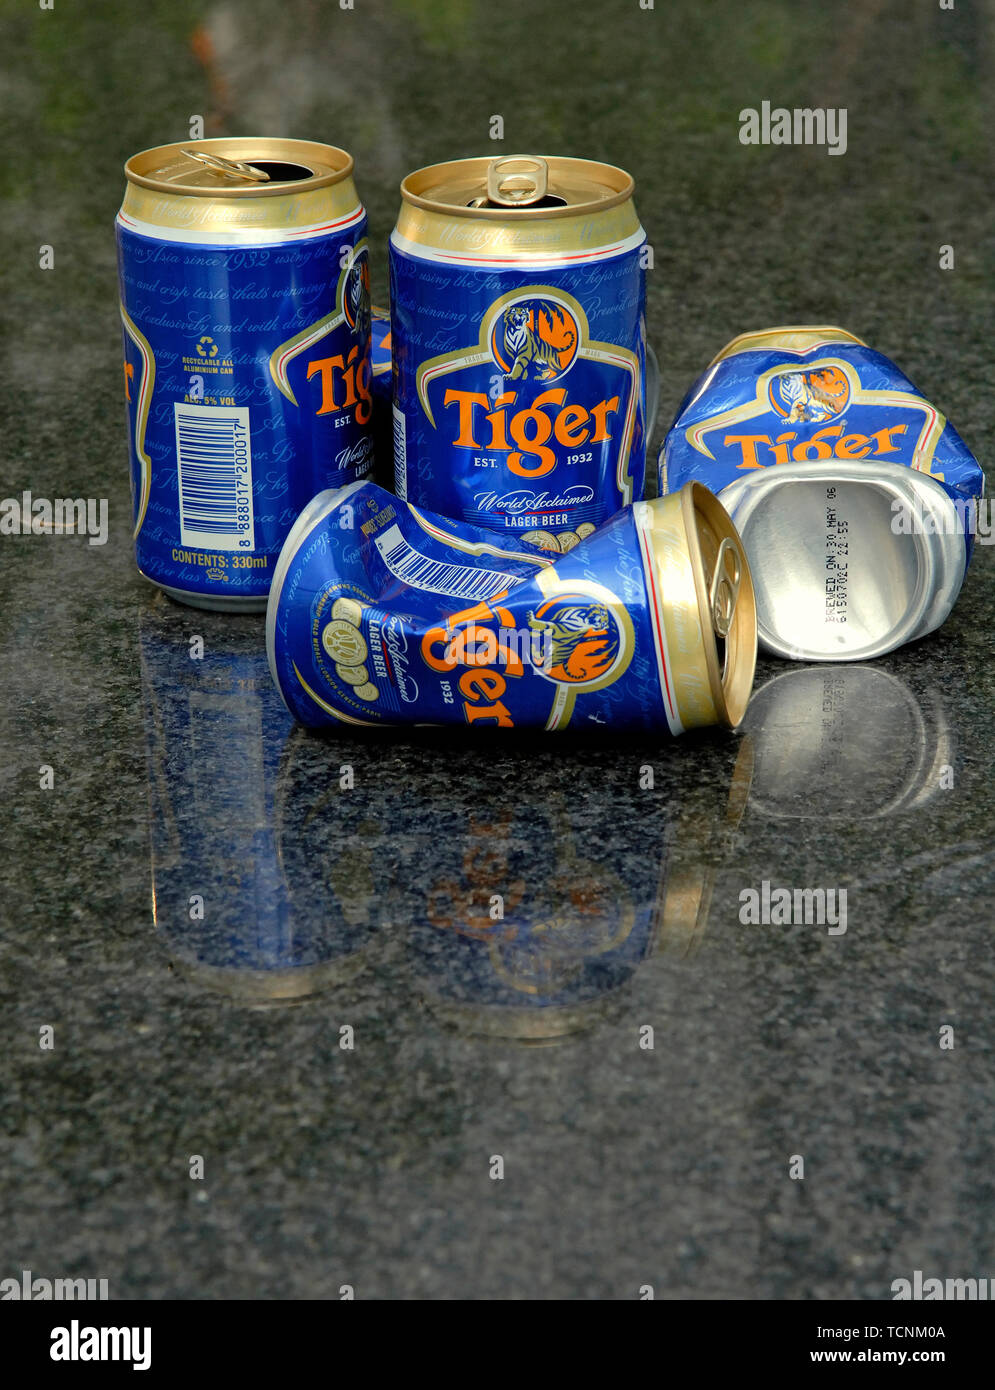 singapore, singapore - september 09, 2009: empty tiger beer cans at uob plaza Stock Photo